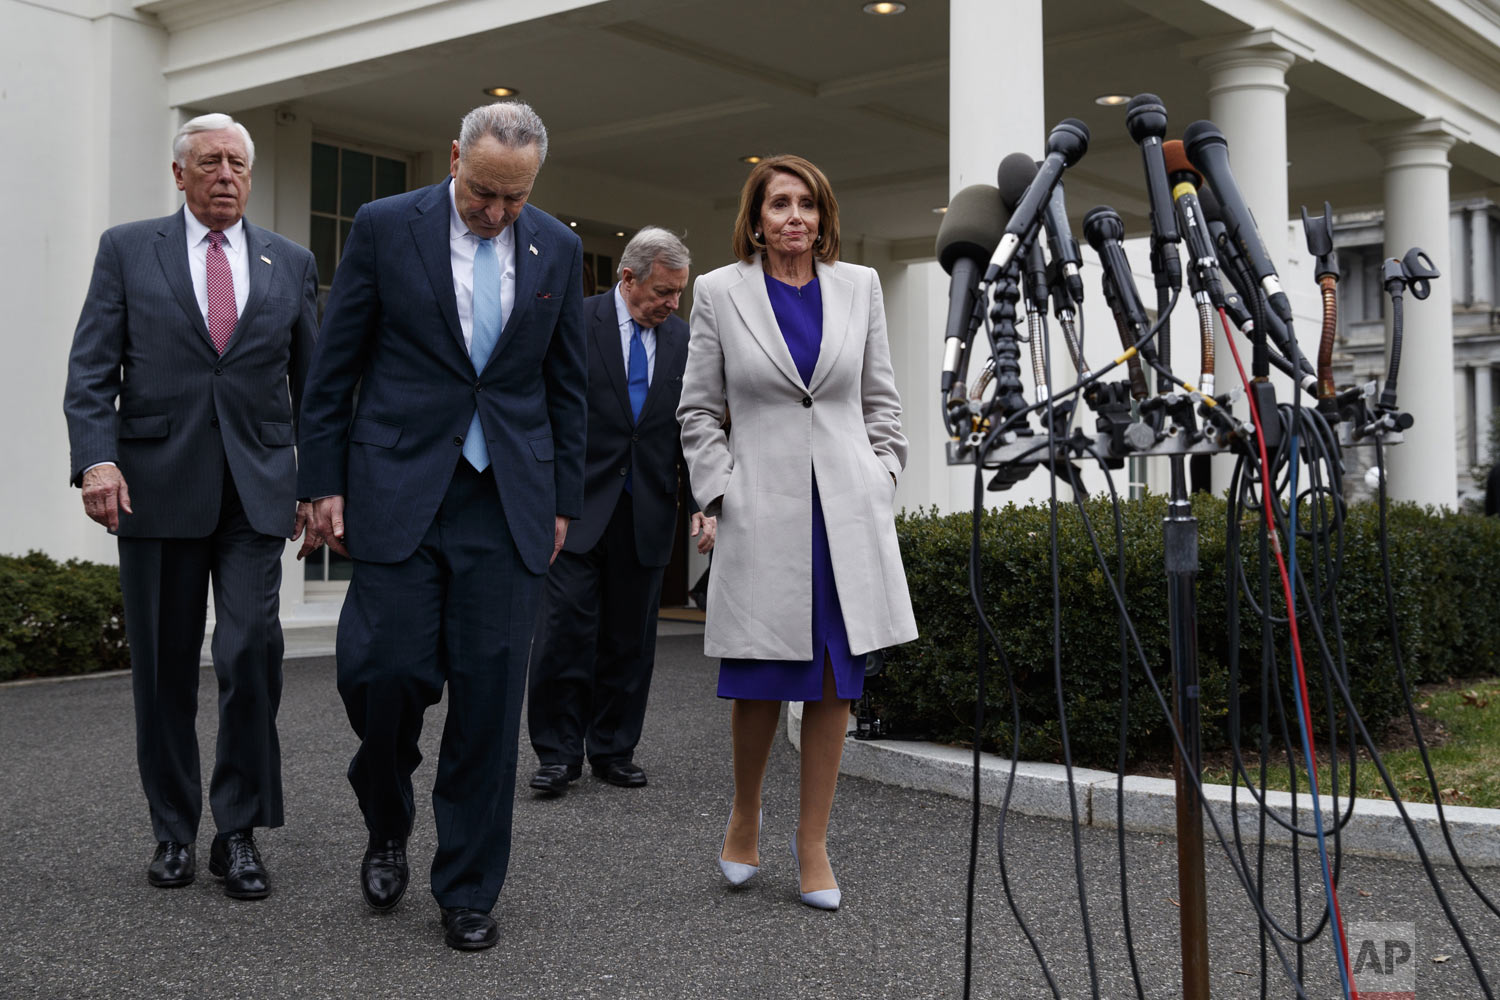  From left, House Majority Leader Steny Hoyer of Md., Senate Minority Leader Chuck Schumer of N.Y., Sen. Dick Durbin, D-Ill., and Speaker of the House Nancy Pelosi of Calif., walk to speak to reporters after meeting with President Donald Trump about 